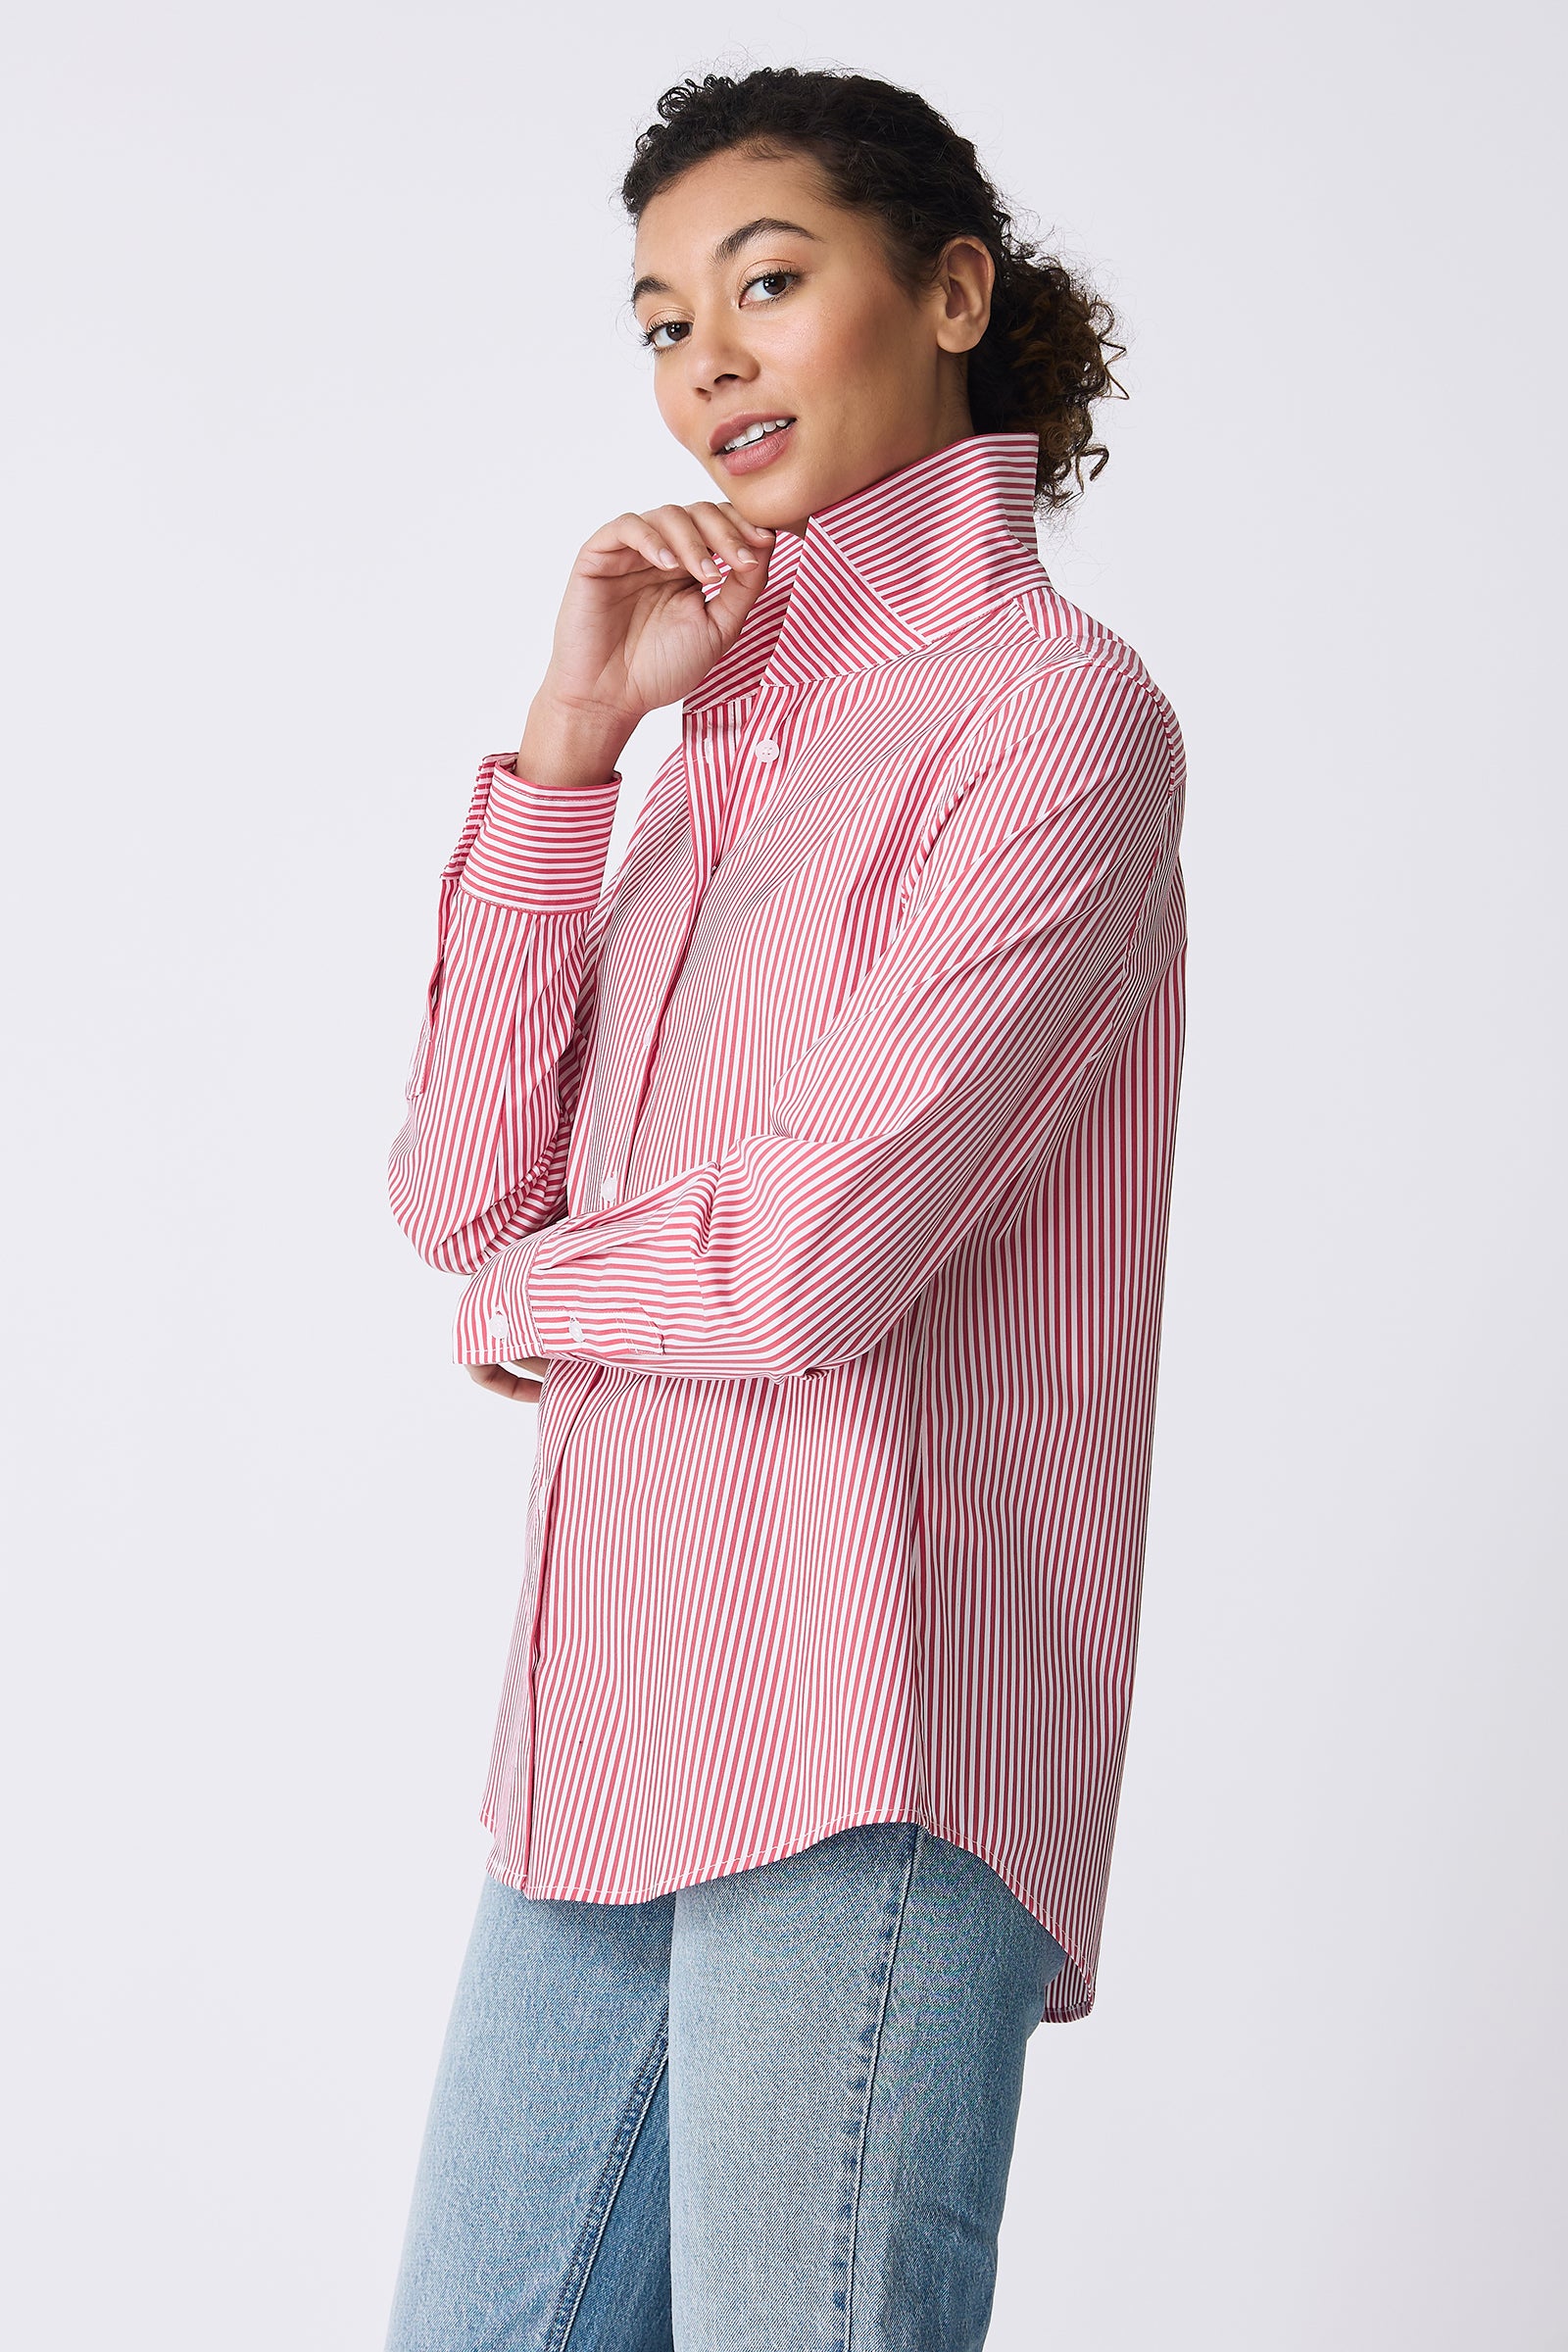 Kal Rieman image of the Ginna Box Pleat Shirt in Miami Stripe Red on model side view